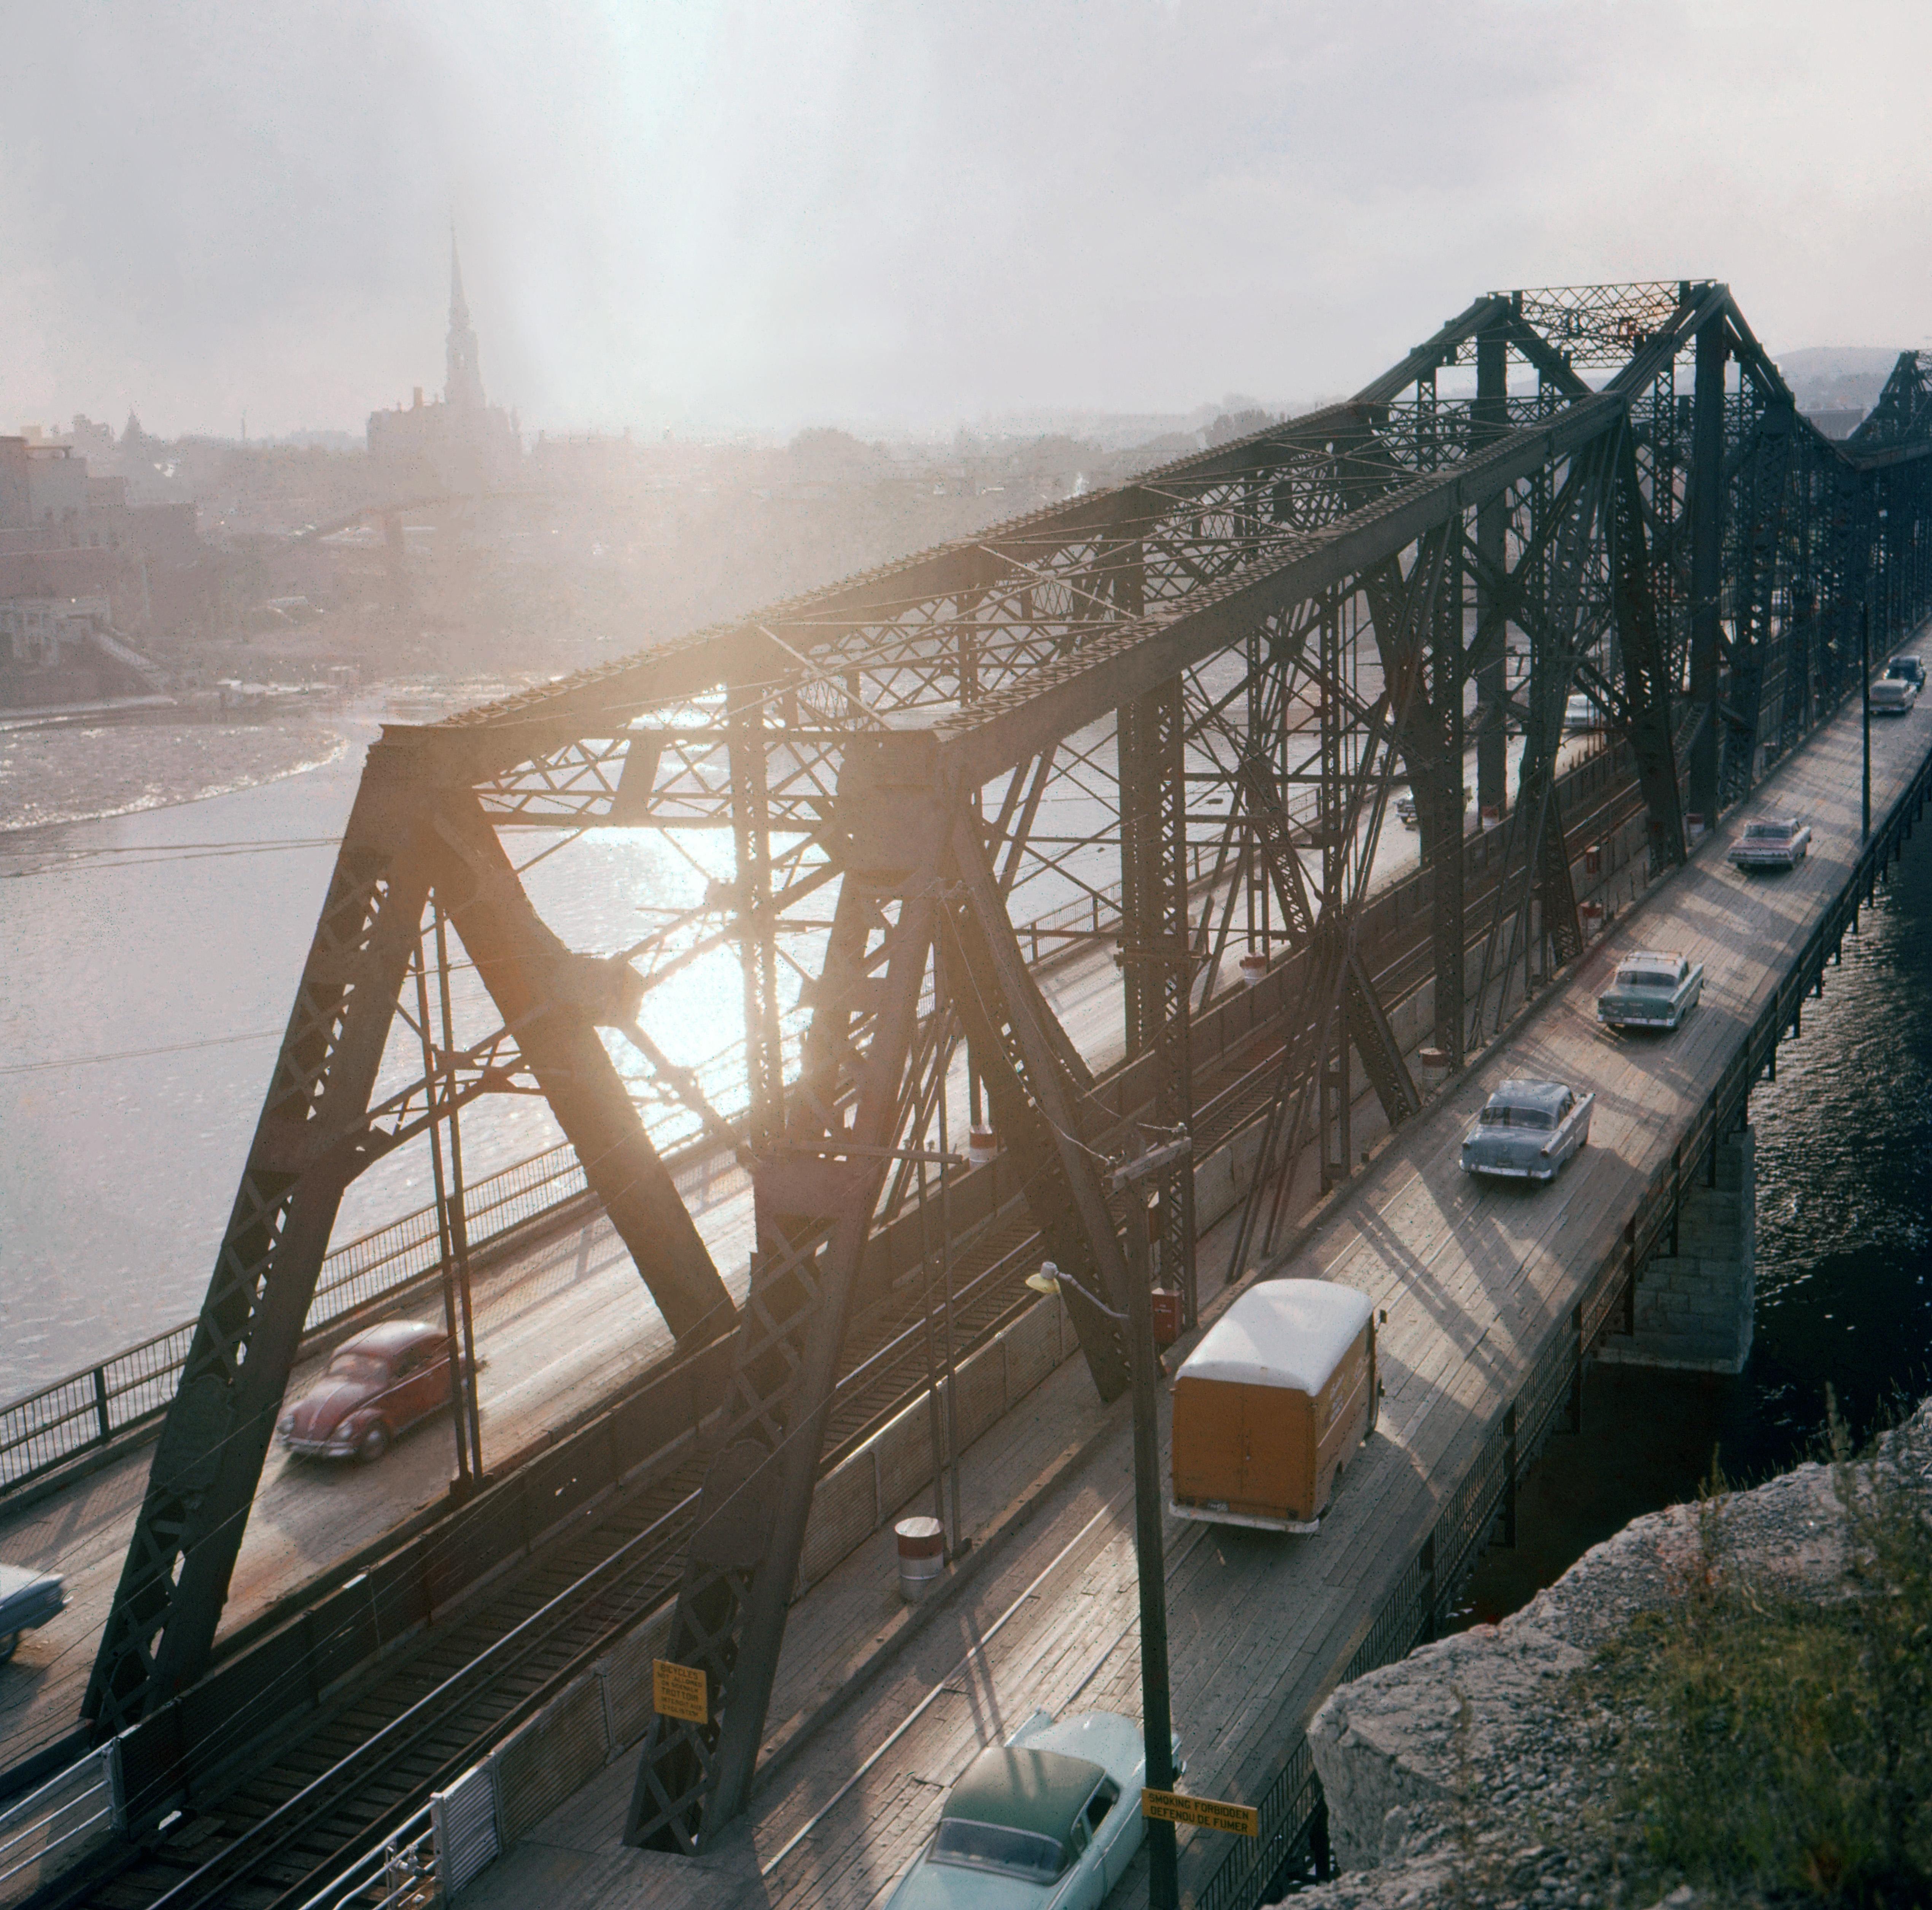 Unknown Color Photograph - Pont Jayques Cartier bridge over St. Lawrence River at Montreal, Canada 1962.